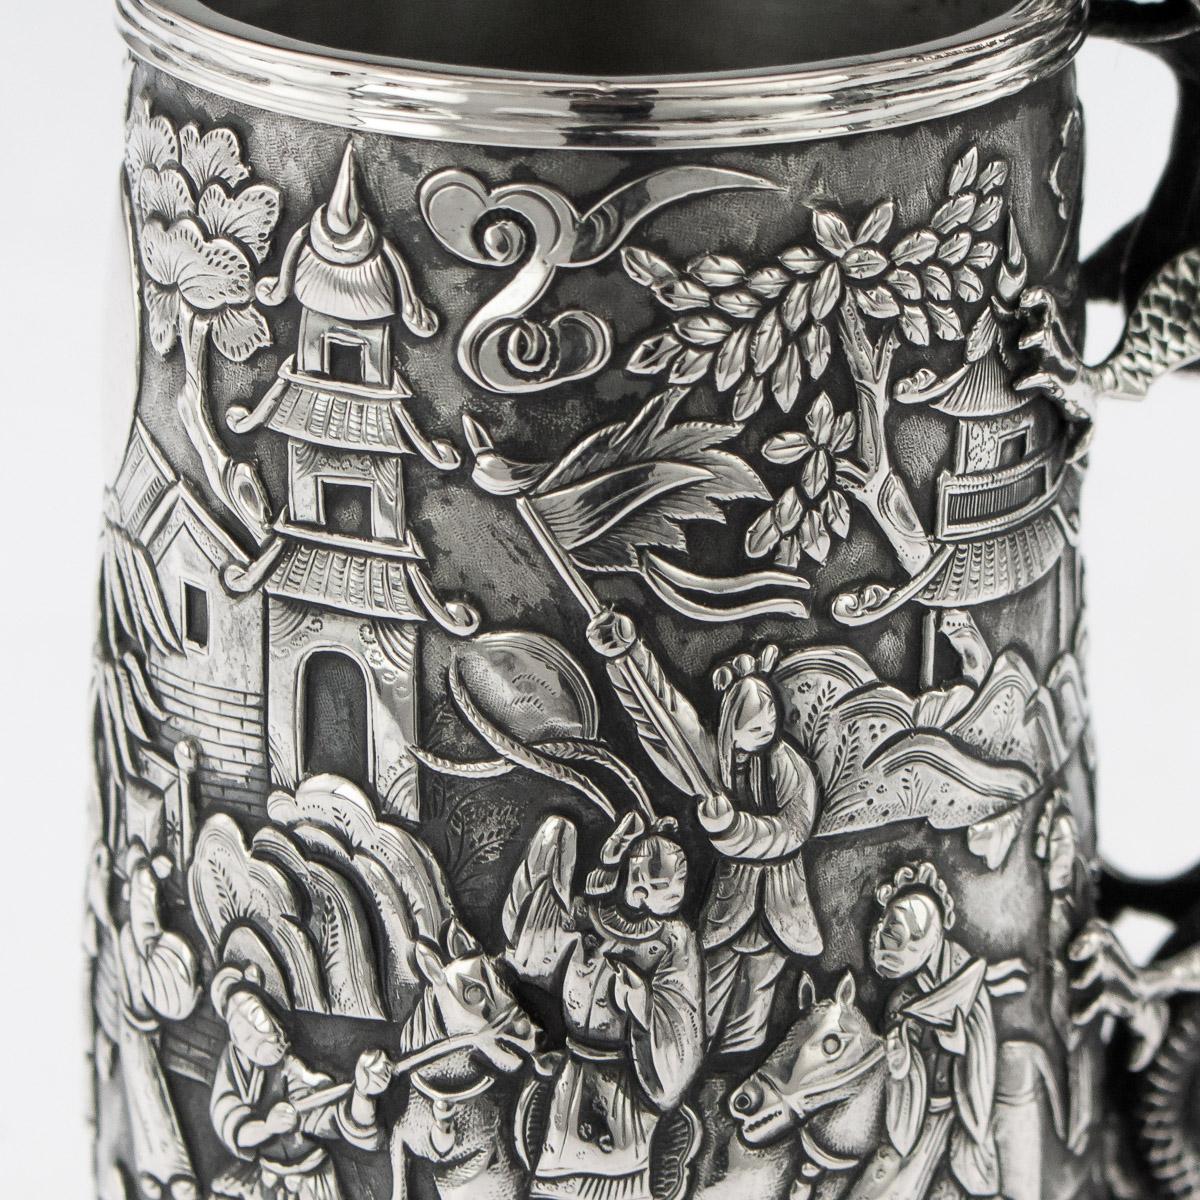 19thC Chinese Export Solid Silver Nobility Scenes Mug, Cutshing, c.1870 6